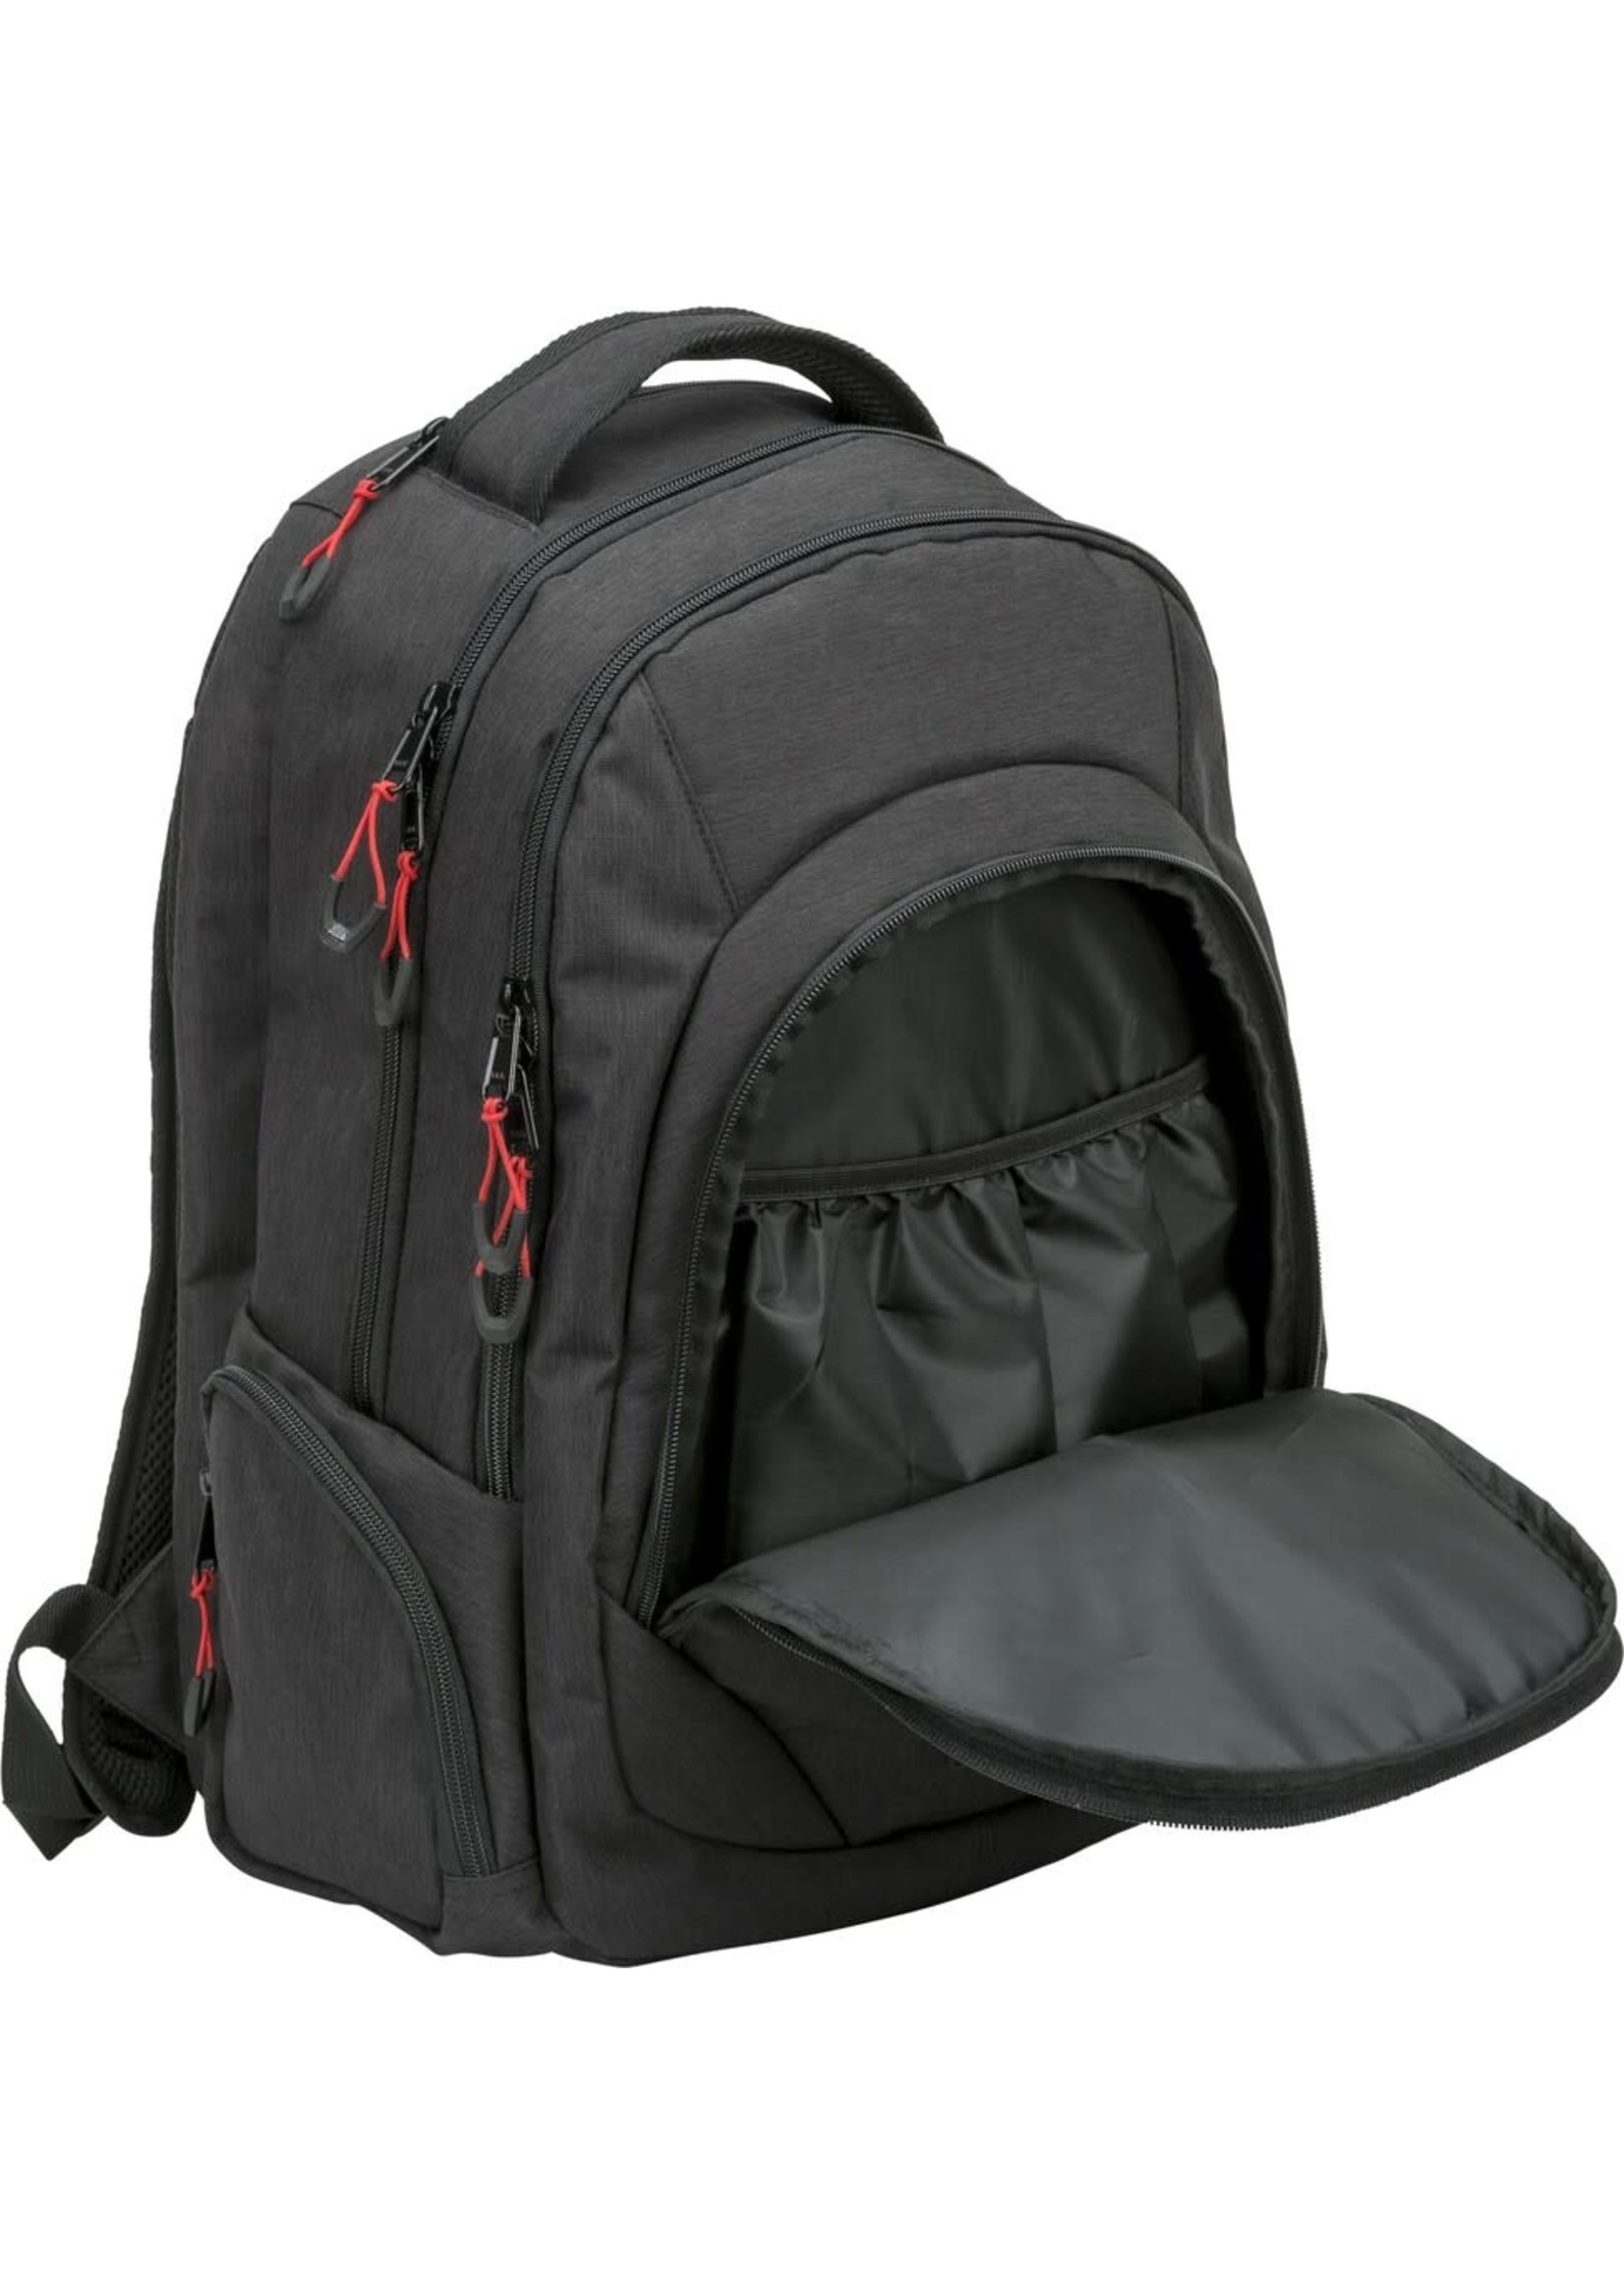 FLY RACING FLY RACING MAIN EVENT BACKPACK BLACK